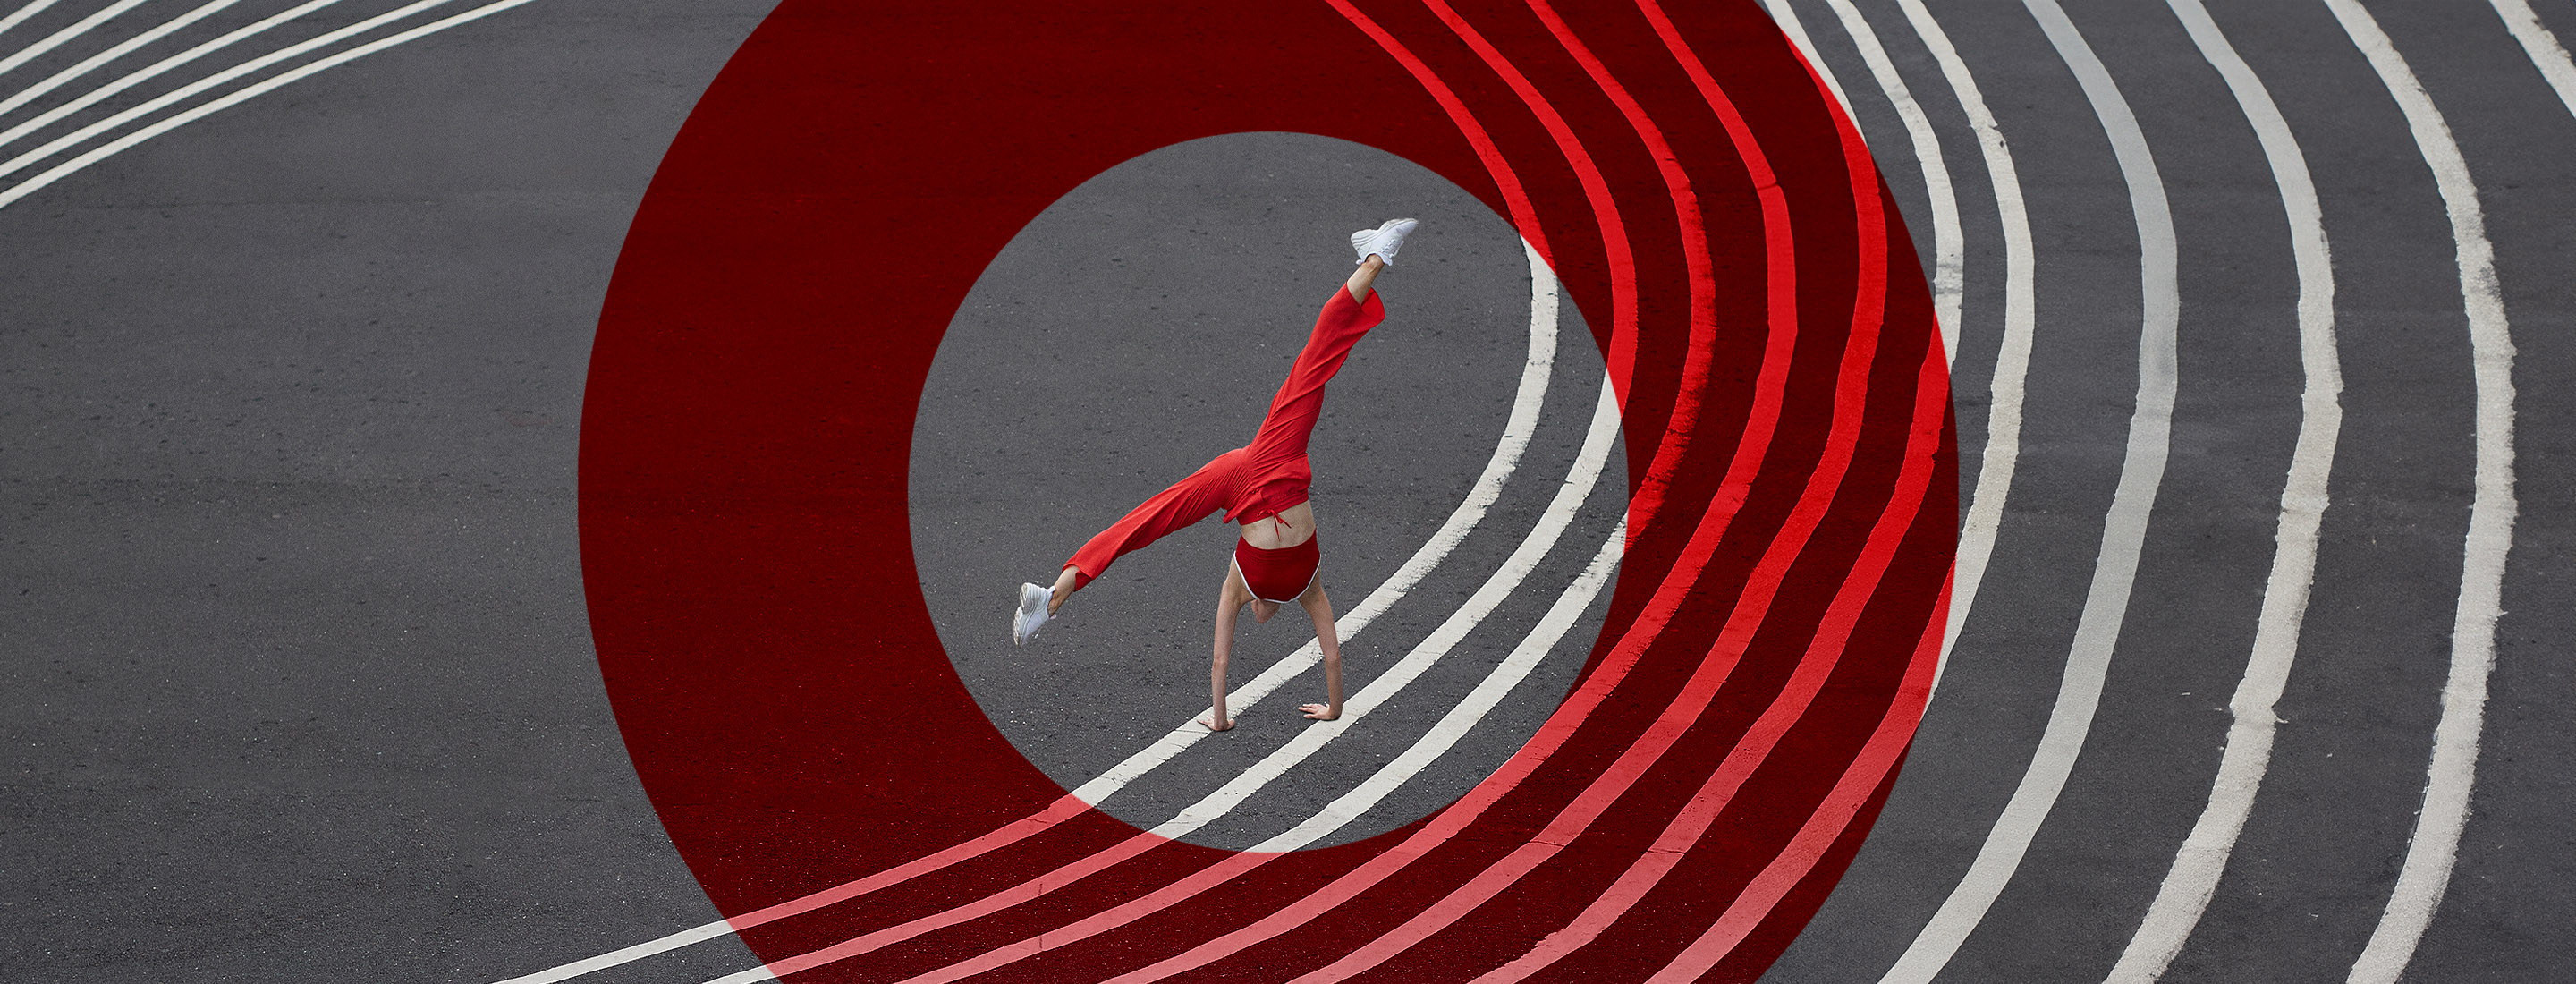 Publicis Sapient logo with person doing cartwheel in middle